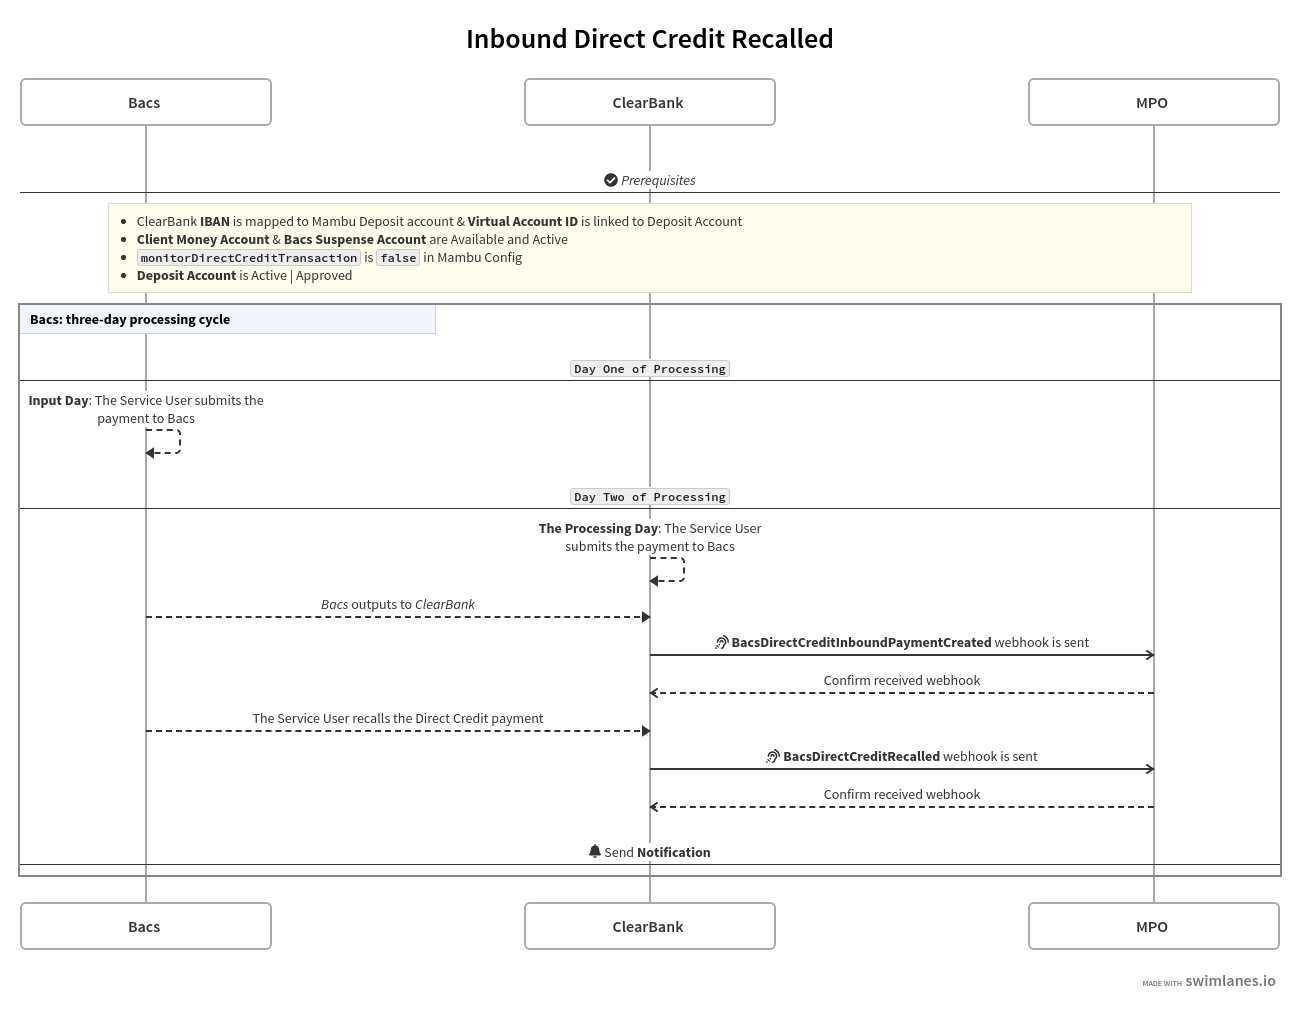 Sequence diagram showing the Inbound Direct Credit Recall flow between Bacs, MPO, Mambu, and ClearBank